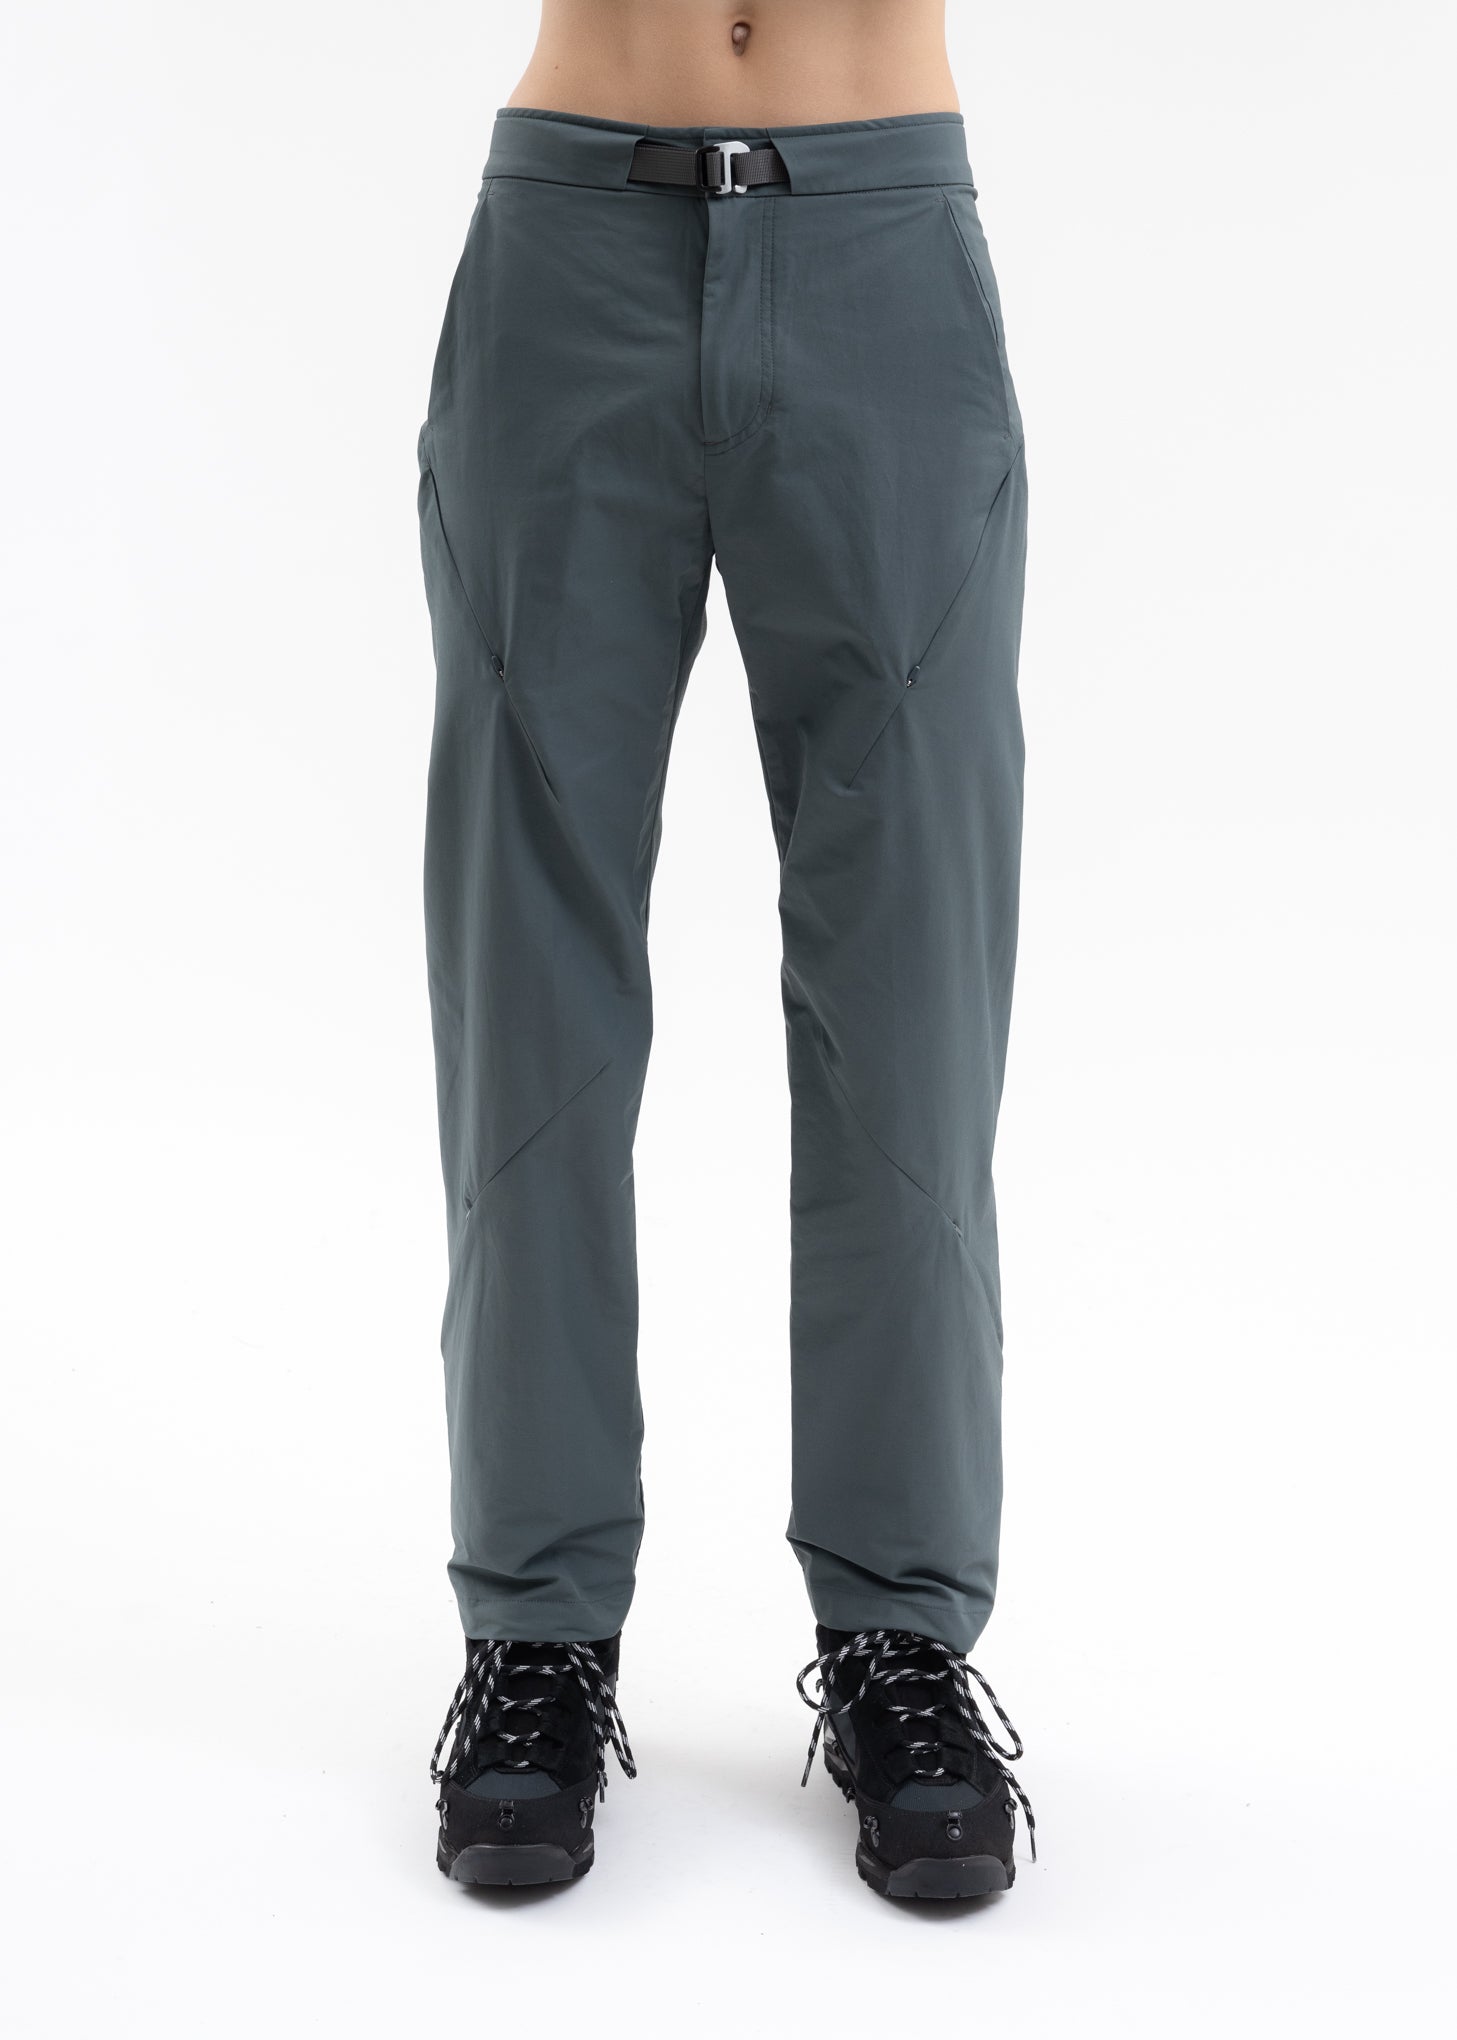 5.0 TECHNICAL PANTS RIGHT (TEAL)